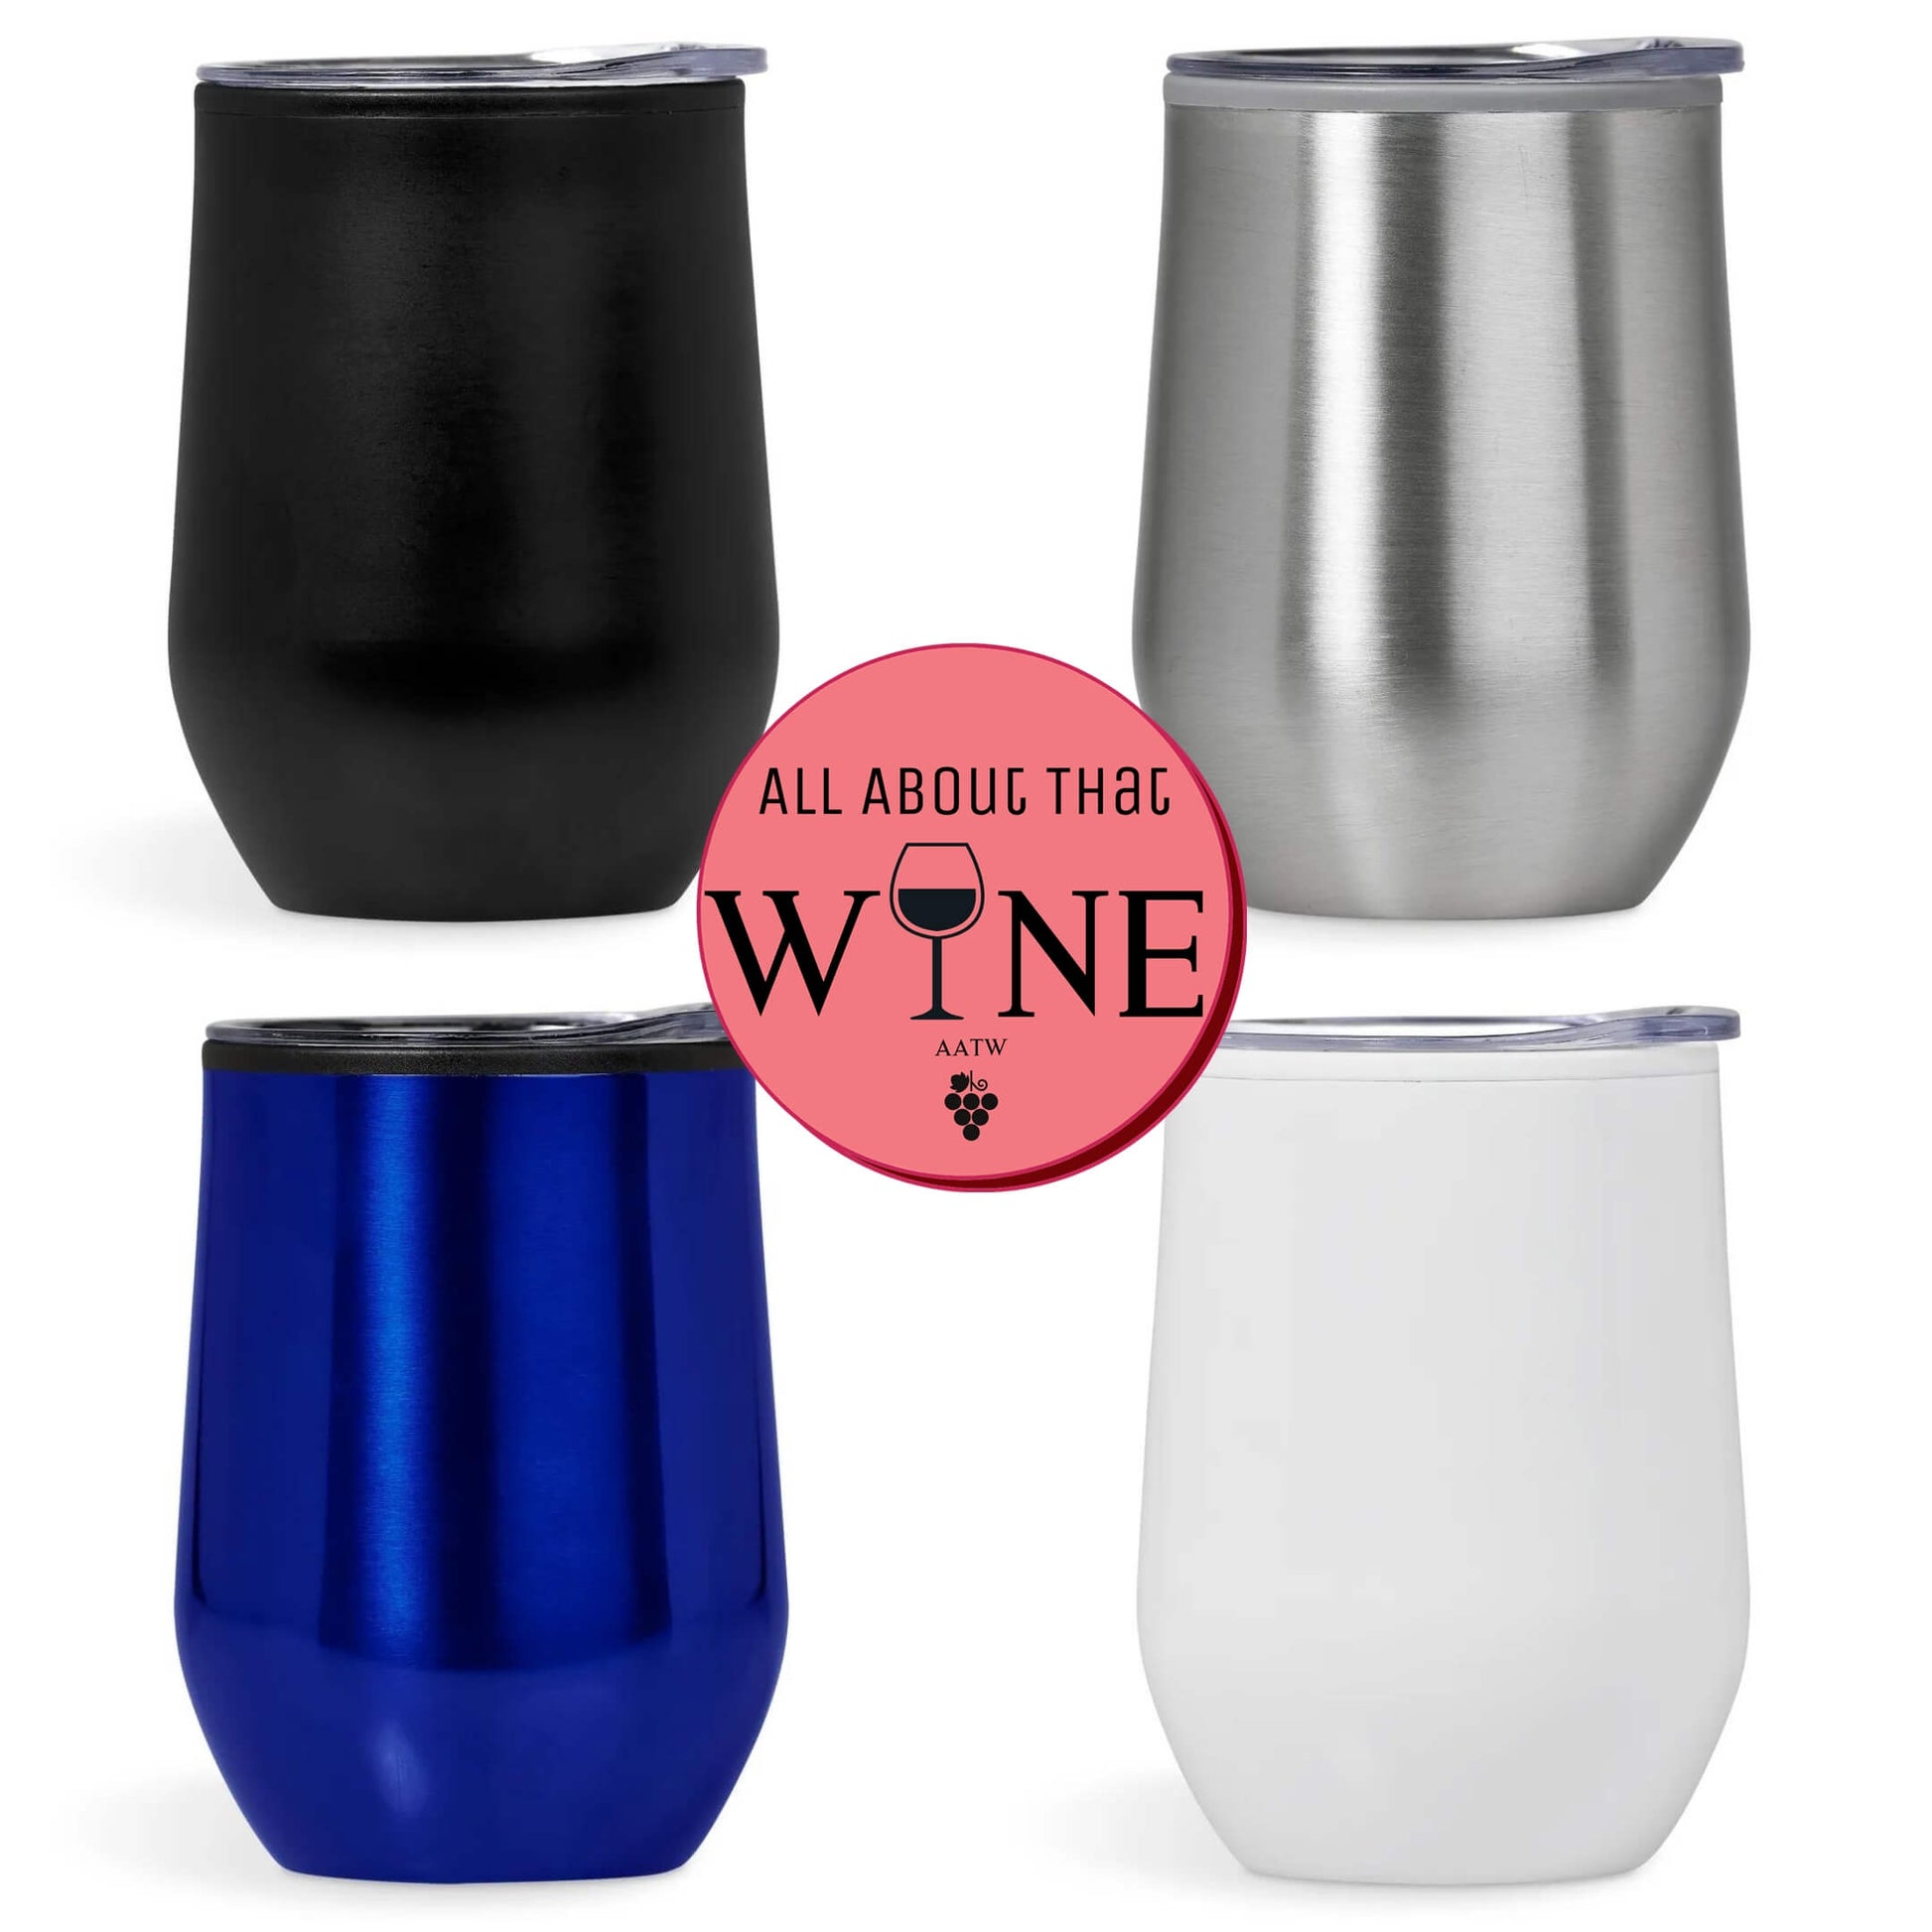 https://cdn.shopify.com/s/files/1/0399/5333/4430/files/Double-wall_tumblers_Stainless_Steel.jpg?v=1645044229